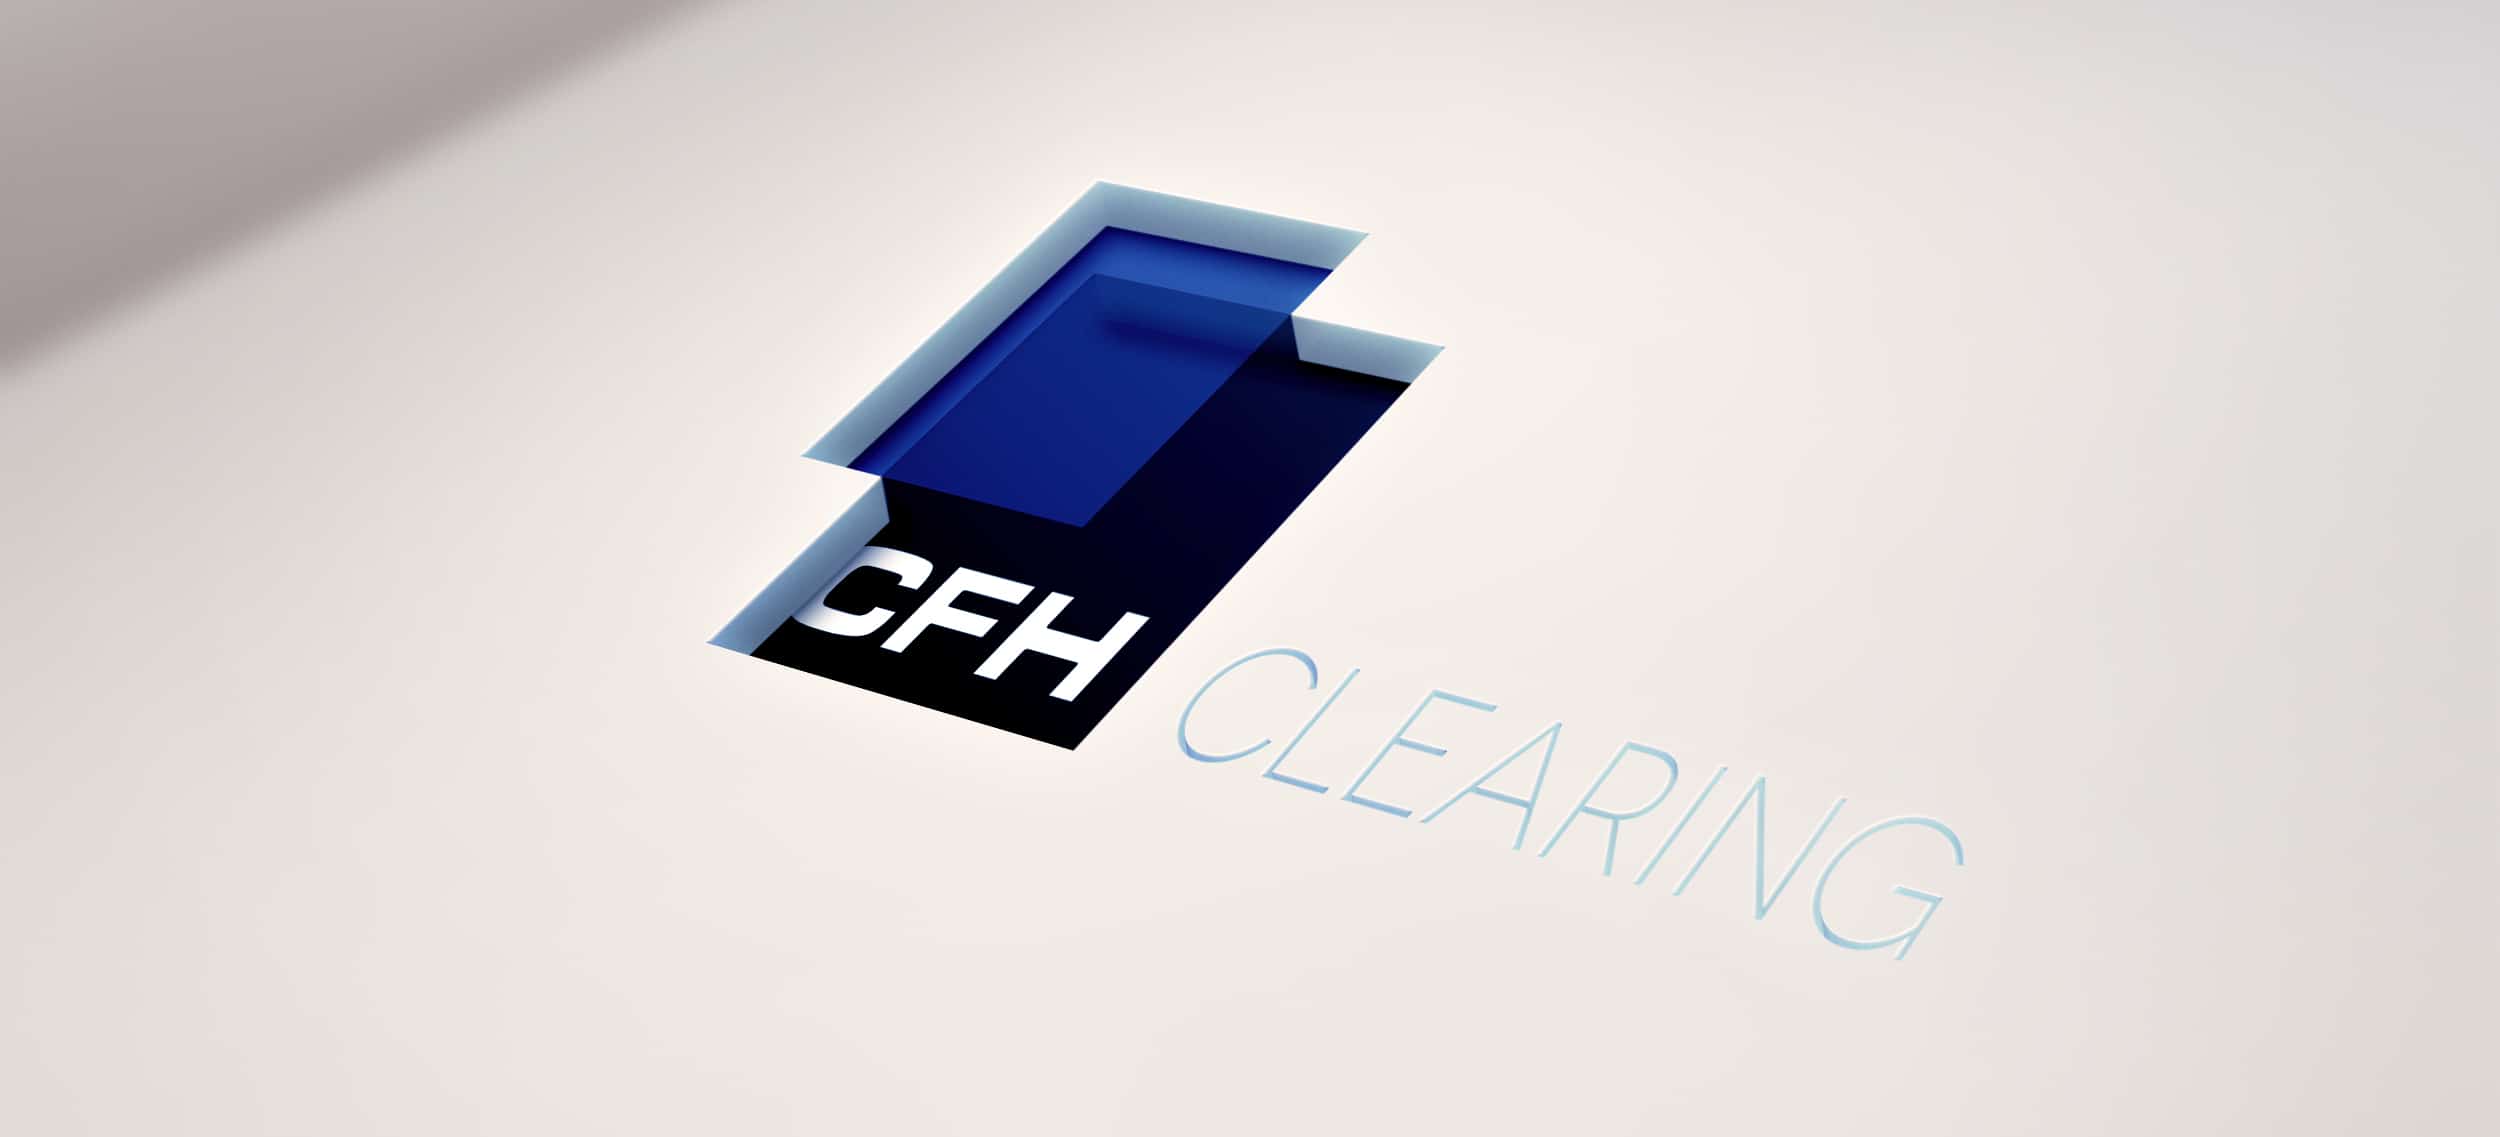 CFH Clearing Launches Partnership with Olfa Trade, Utilizing SFX Platform